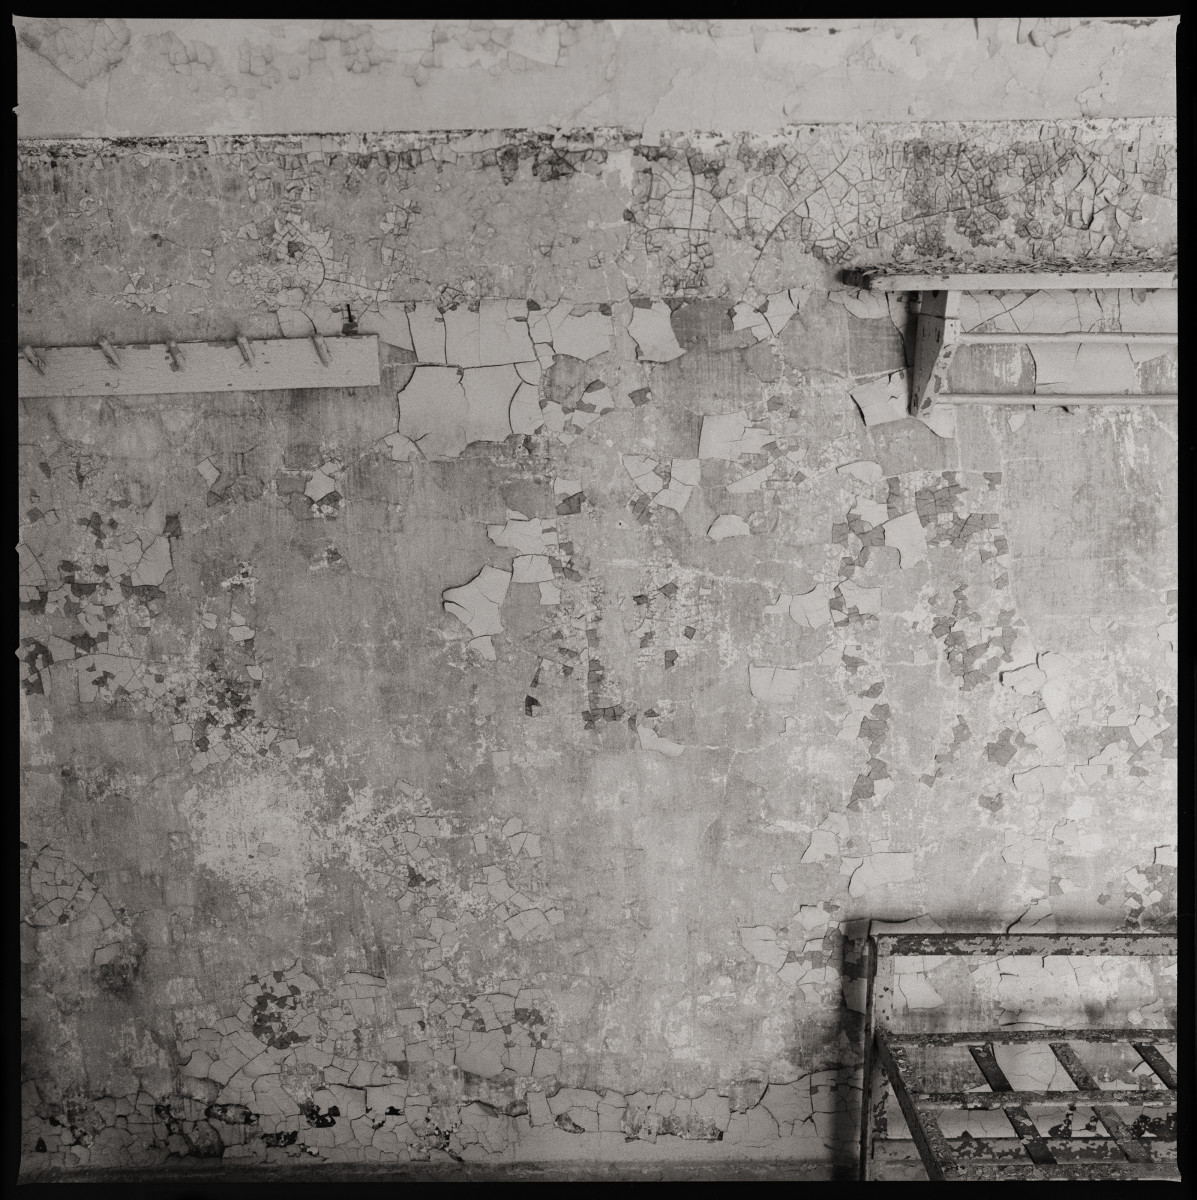 Solitude by Eric T. Kunsman  Image:  ID: A black and white image shows a wall with the paint peeling and cracking cement.  There is a corner of a metal bed frame in the lower right corner.